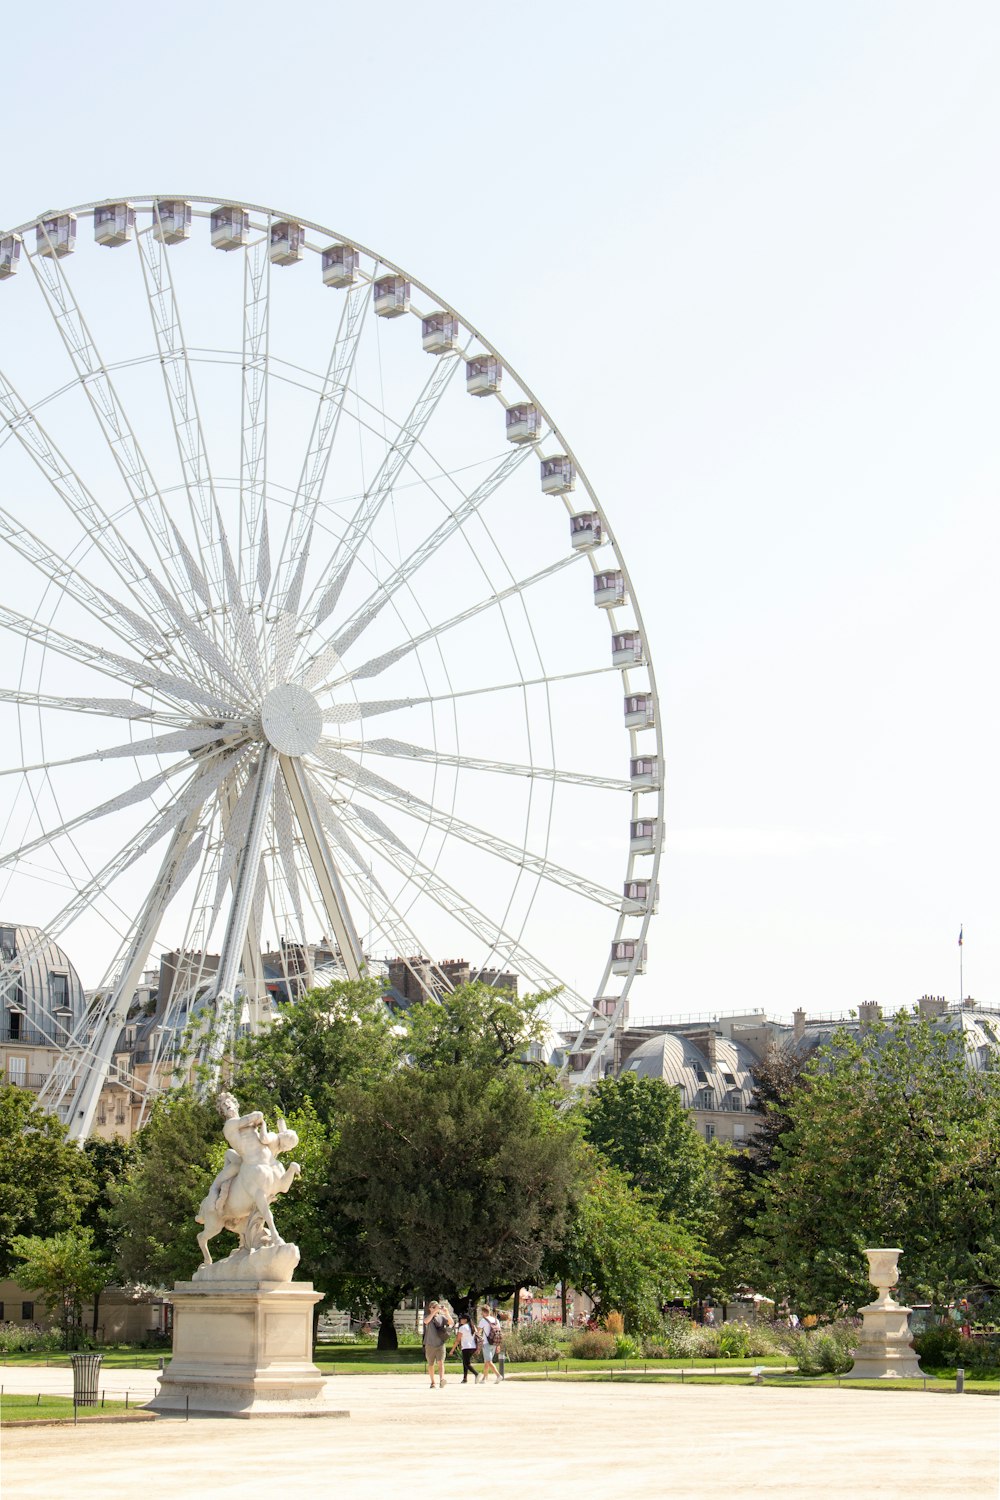 gray and white ferris whee l